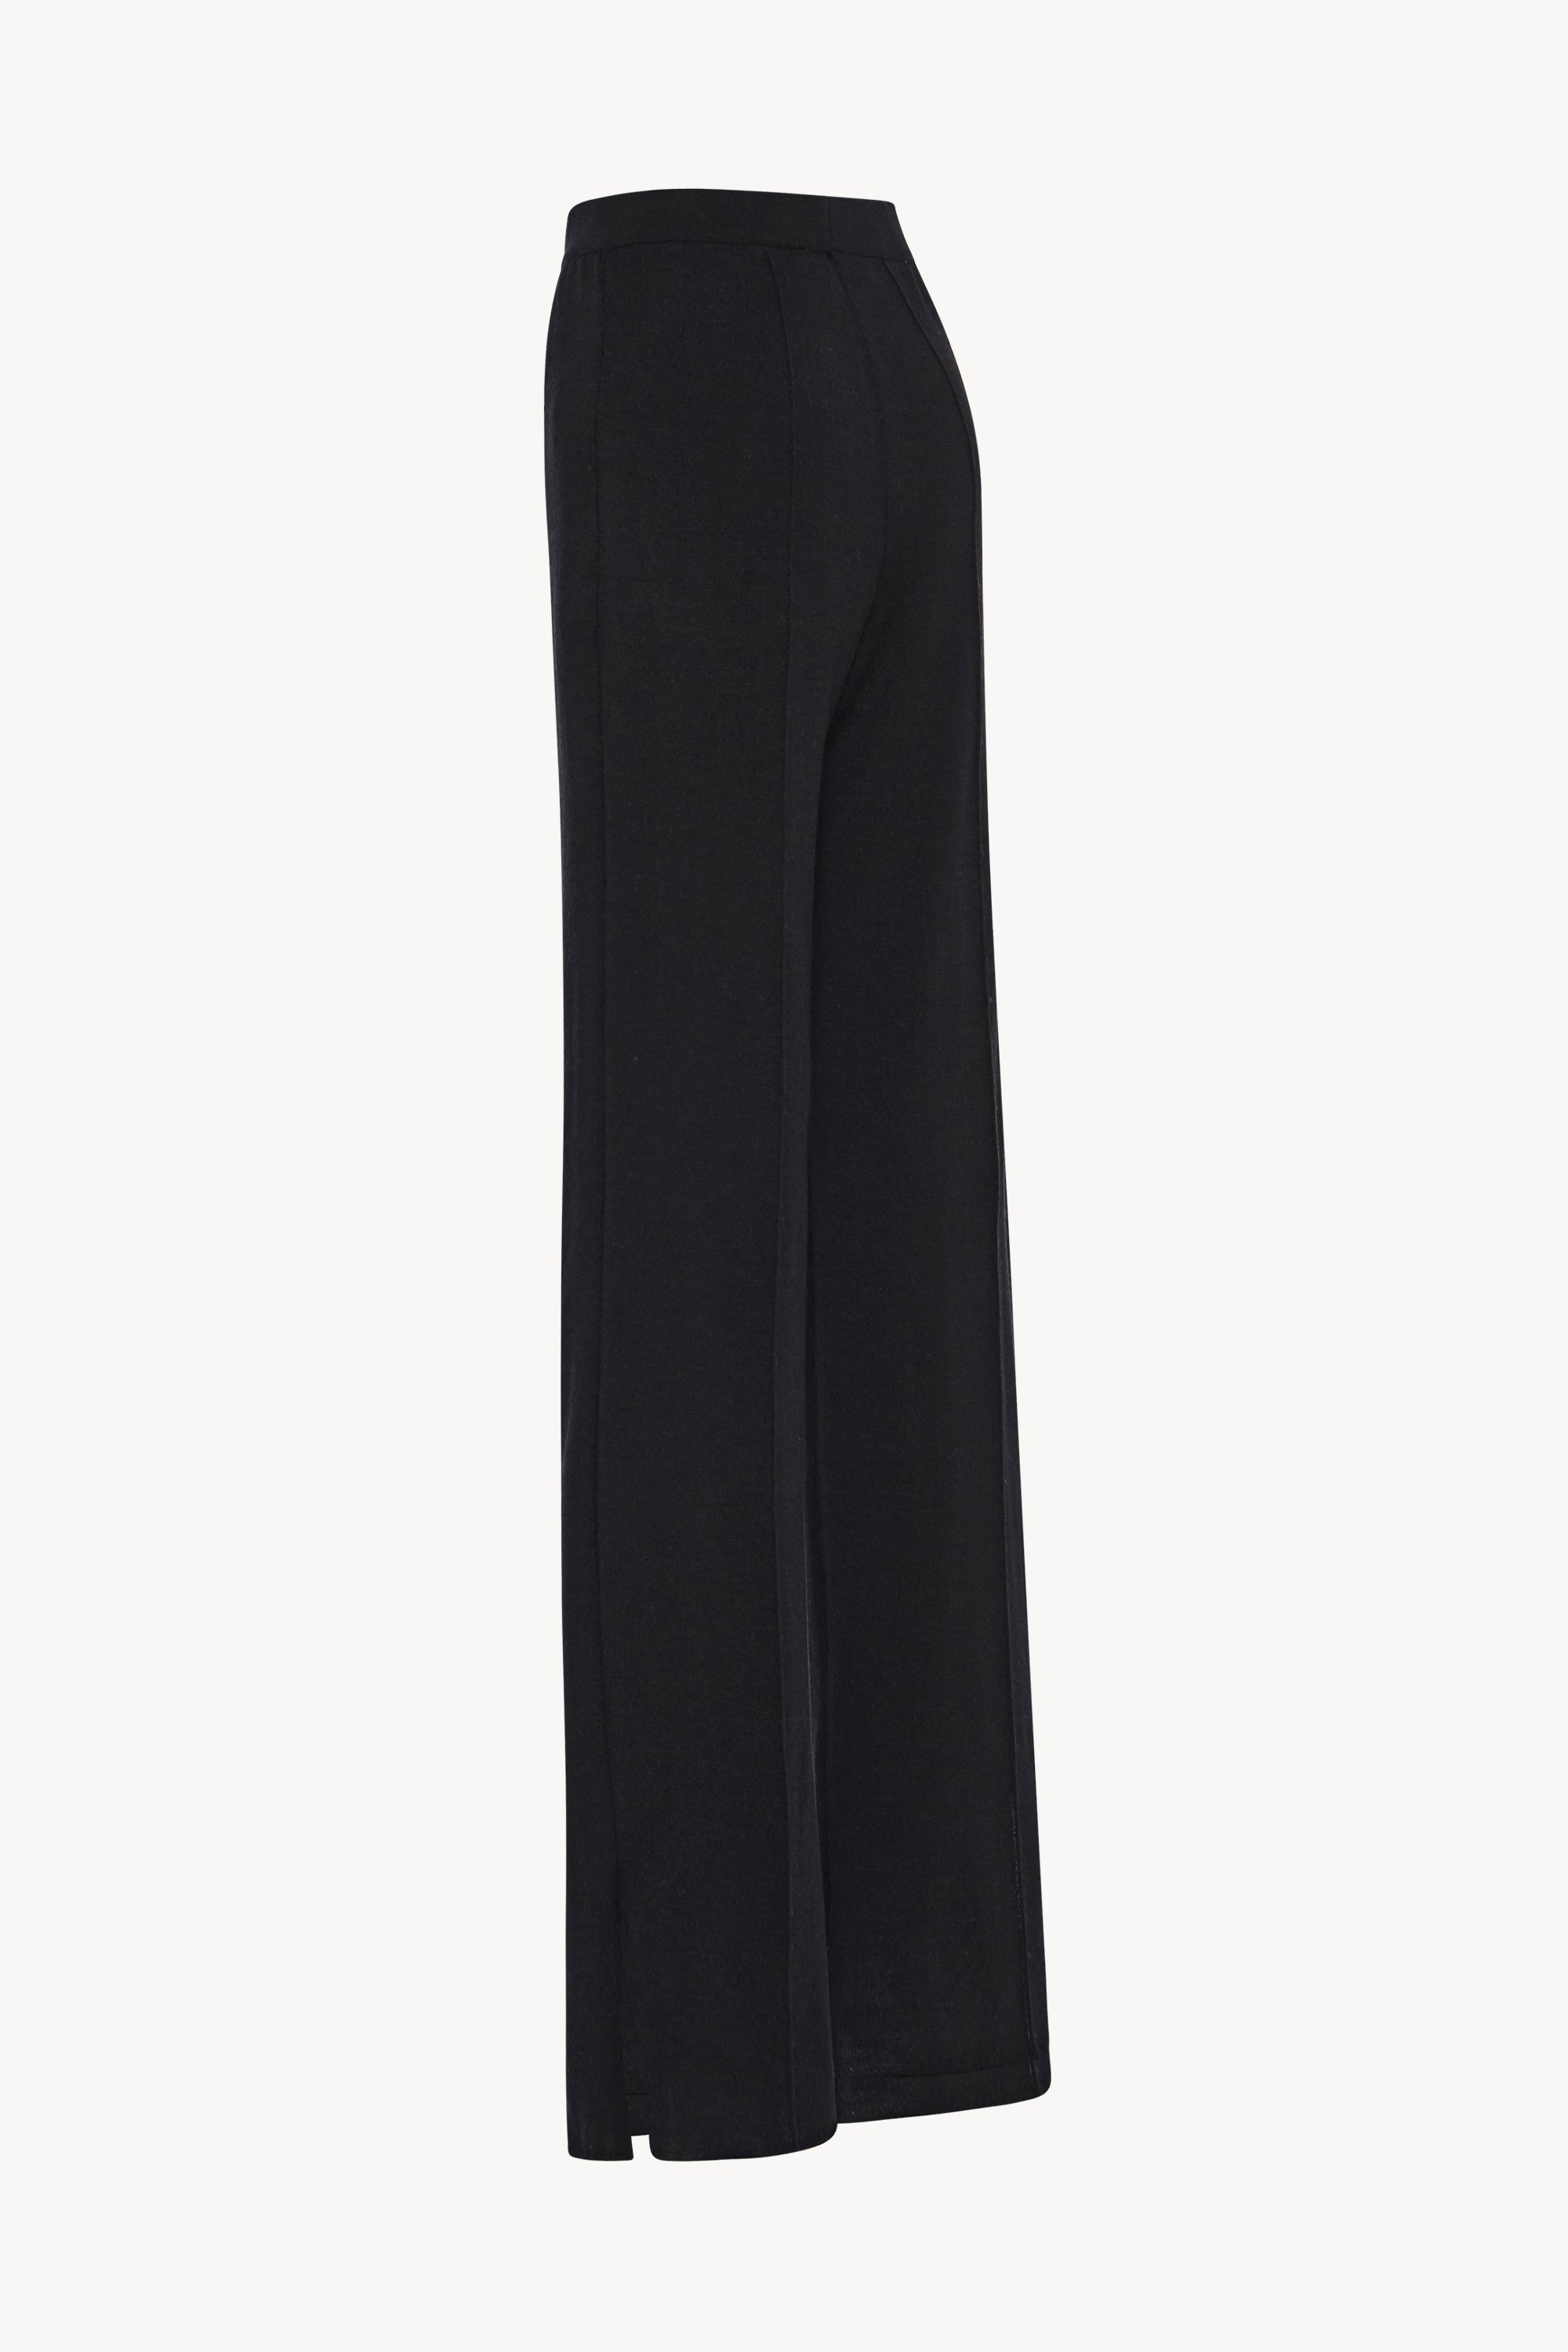 Egle Pant in Wool, Silk and Cashmere - 2